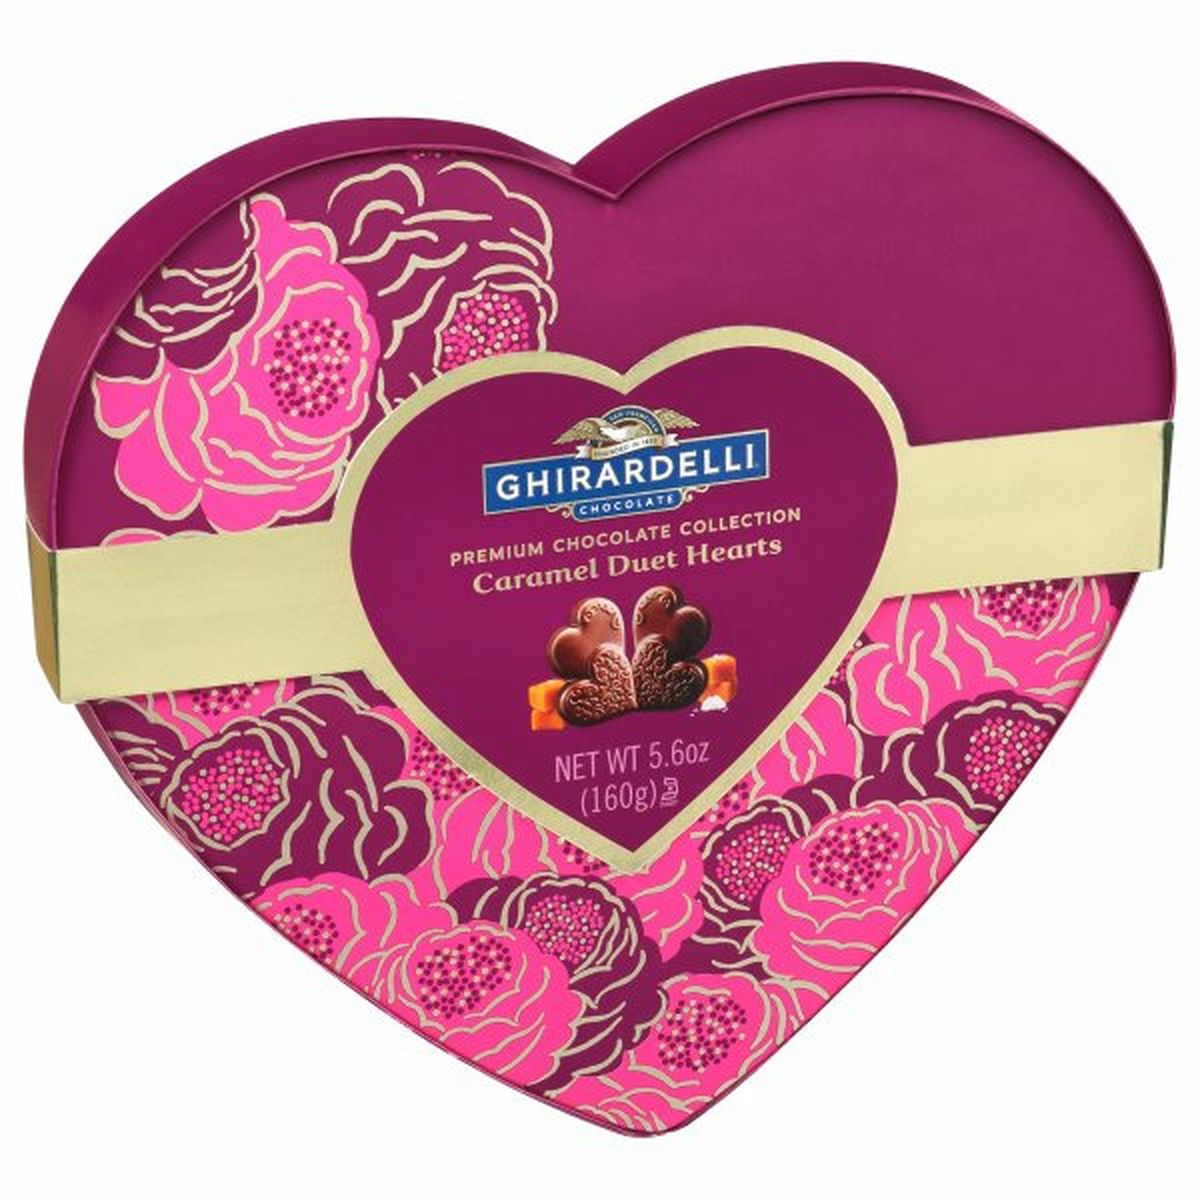 Calories in Ghirardelli Chocolate Collection, Premium, Caramel Duet Hearts